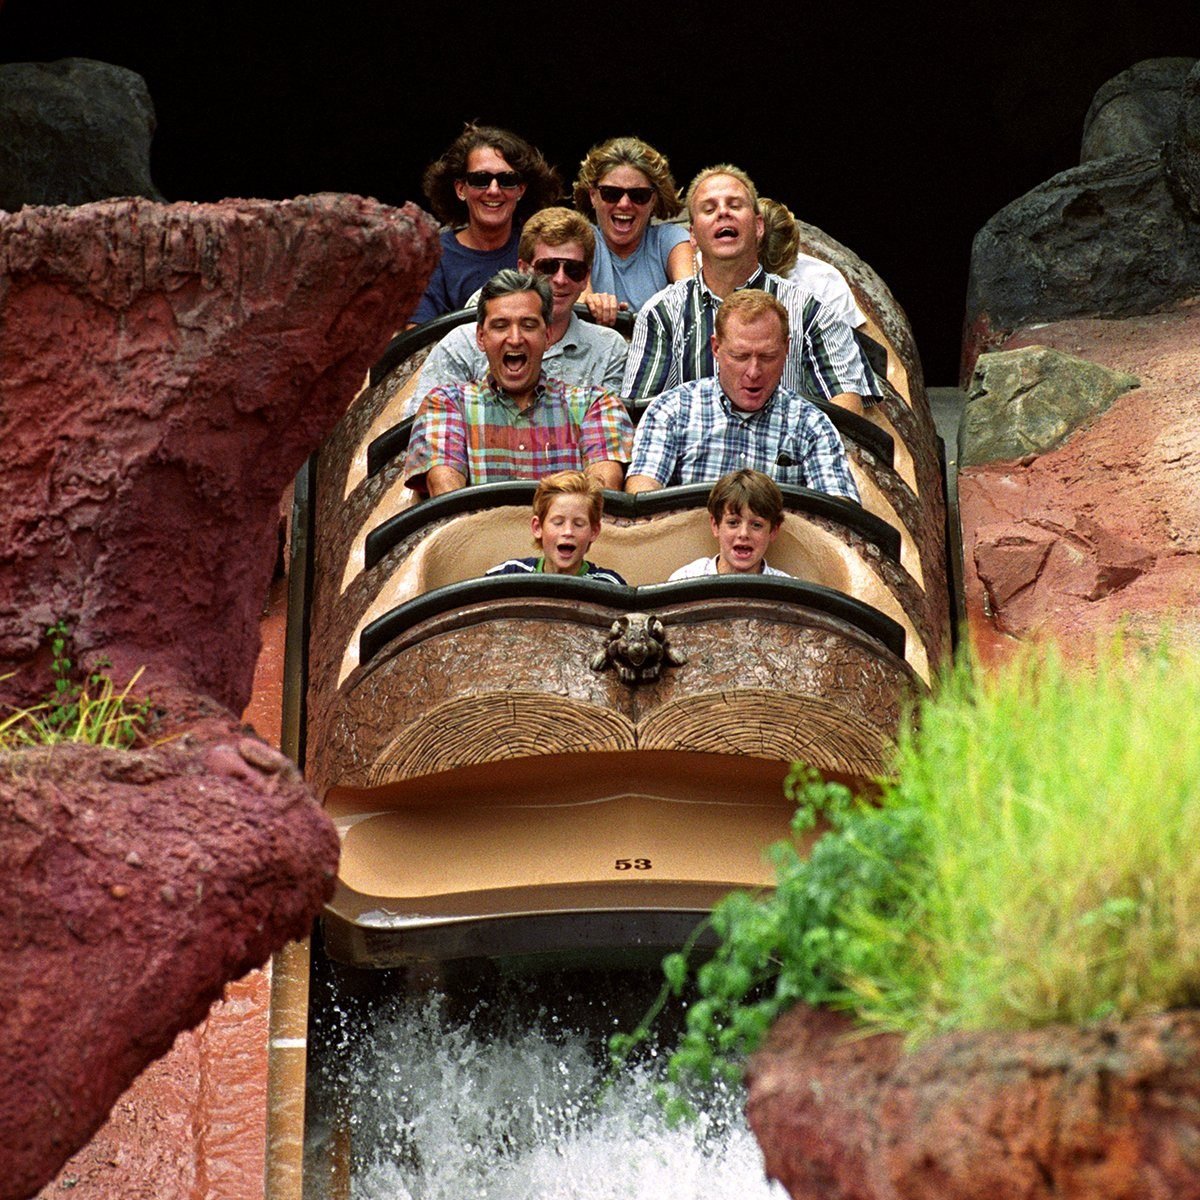 Prince Harry (front left) rides a Log Flume down Splash Mountain at Disney's Magic Kingdom in Florida, USA, leaning forward, hidden (top row right) is his mother the Princess of Wales. (Photo by Martin Keene - PA Images/PA Images via Getty Images)